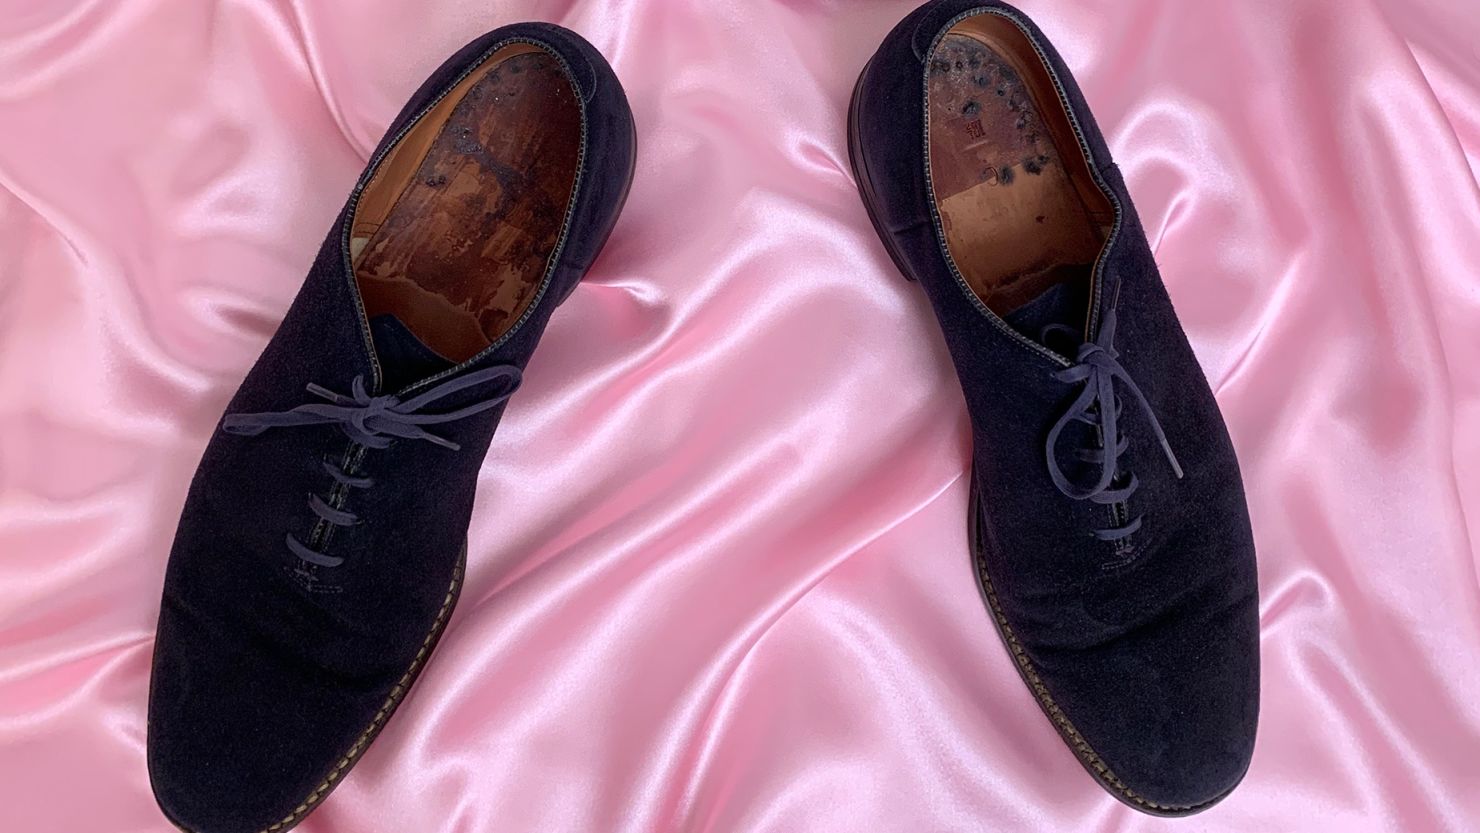 Elvis Presley's actual blue suede shoes sell for $150,000 in auction | CNN